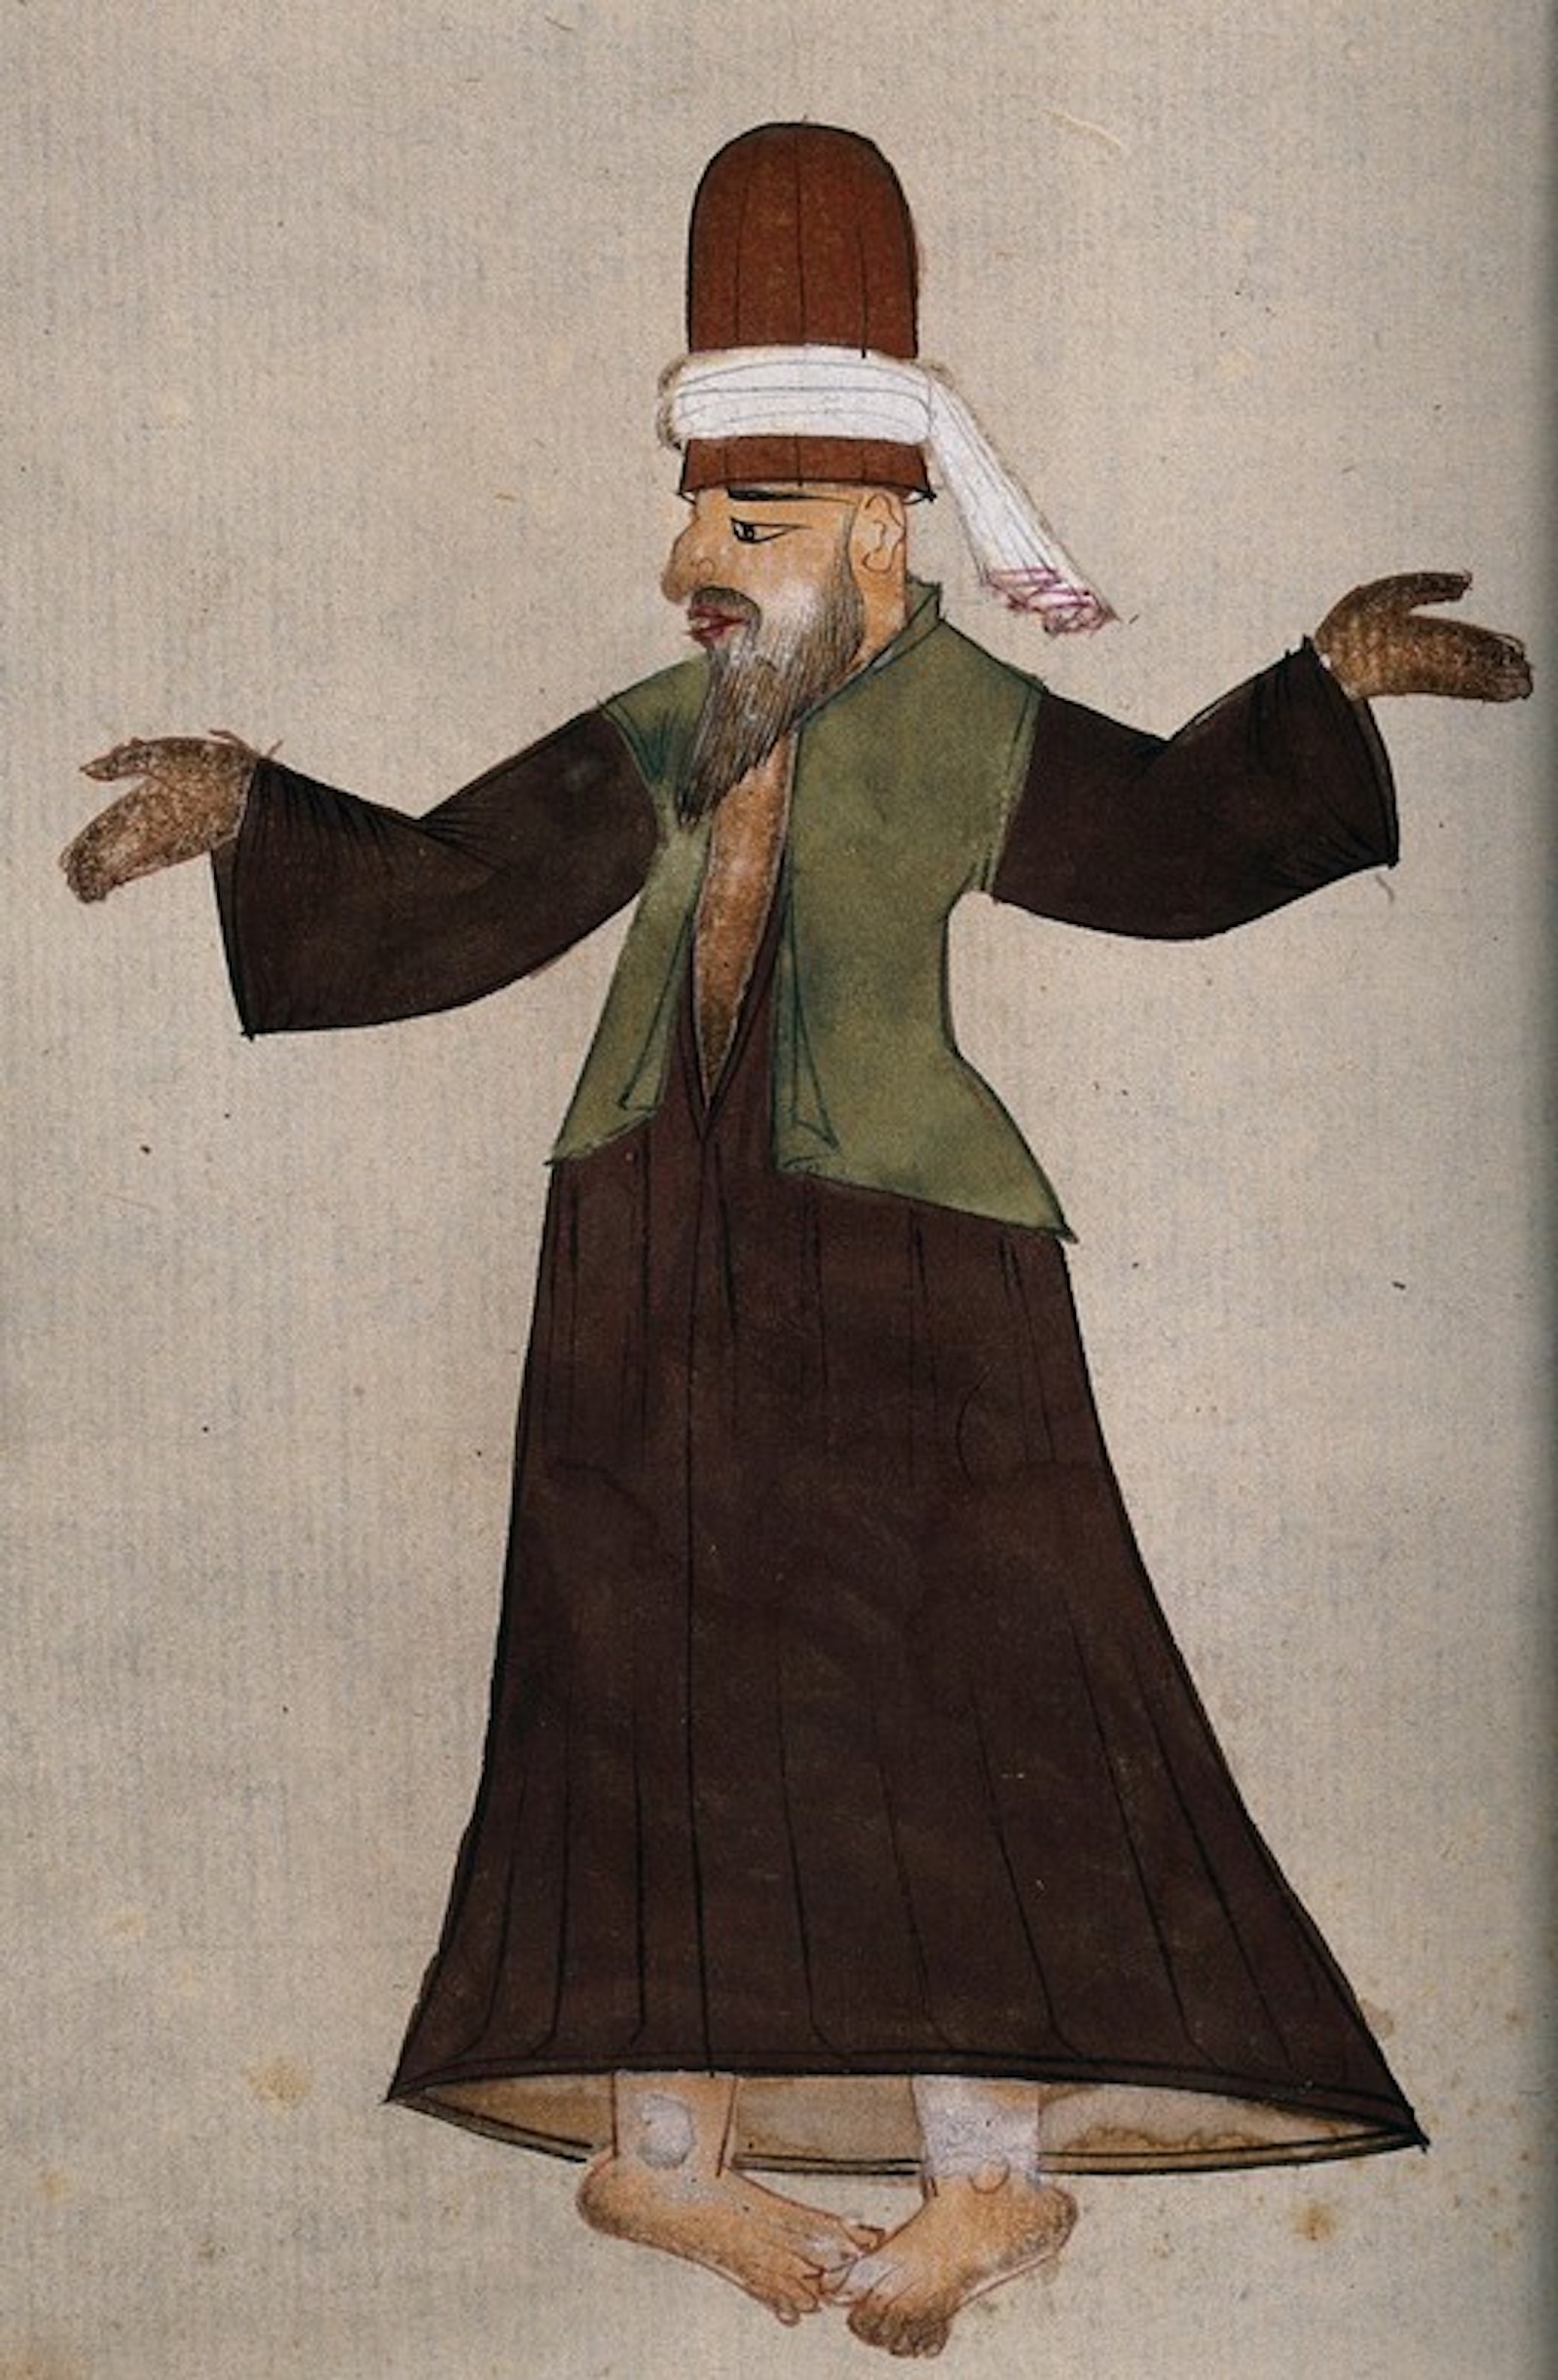 A whirling dervish, c. 1850. Wellcome Collection (CC BY).